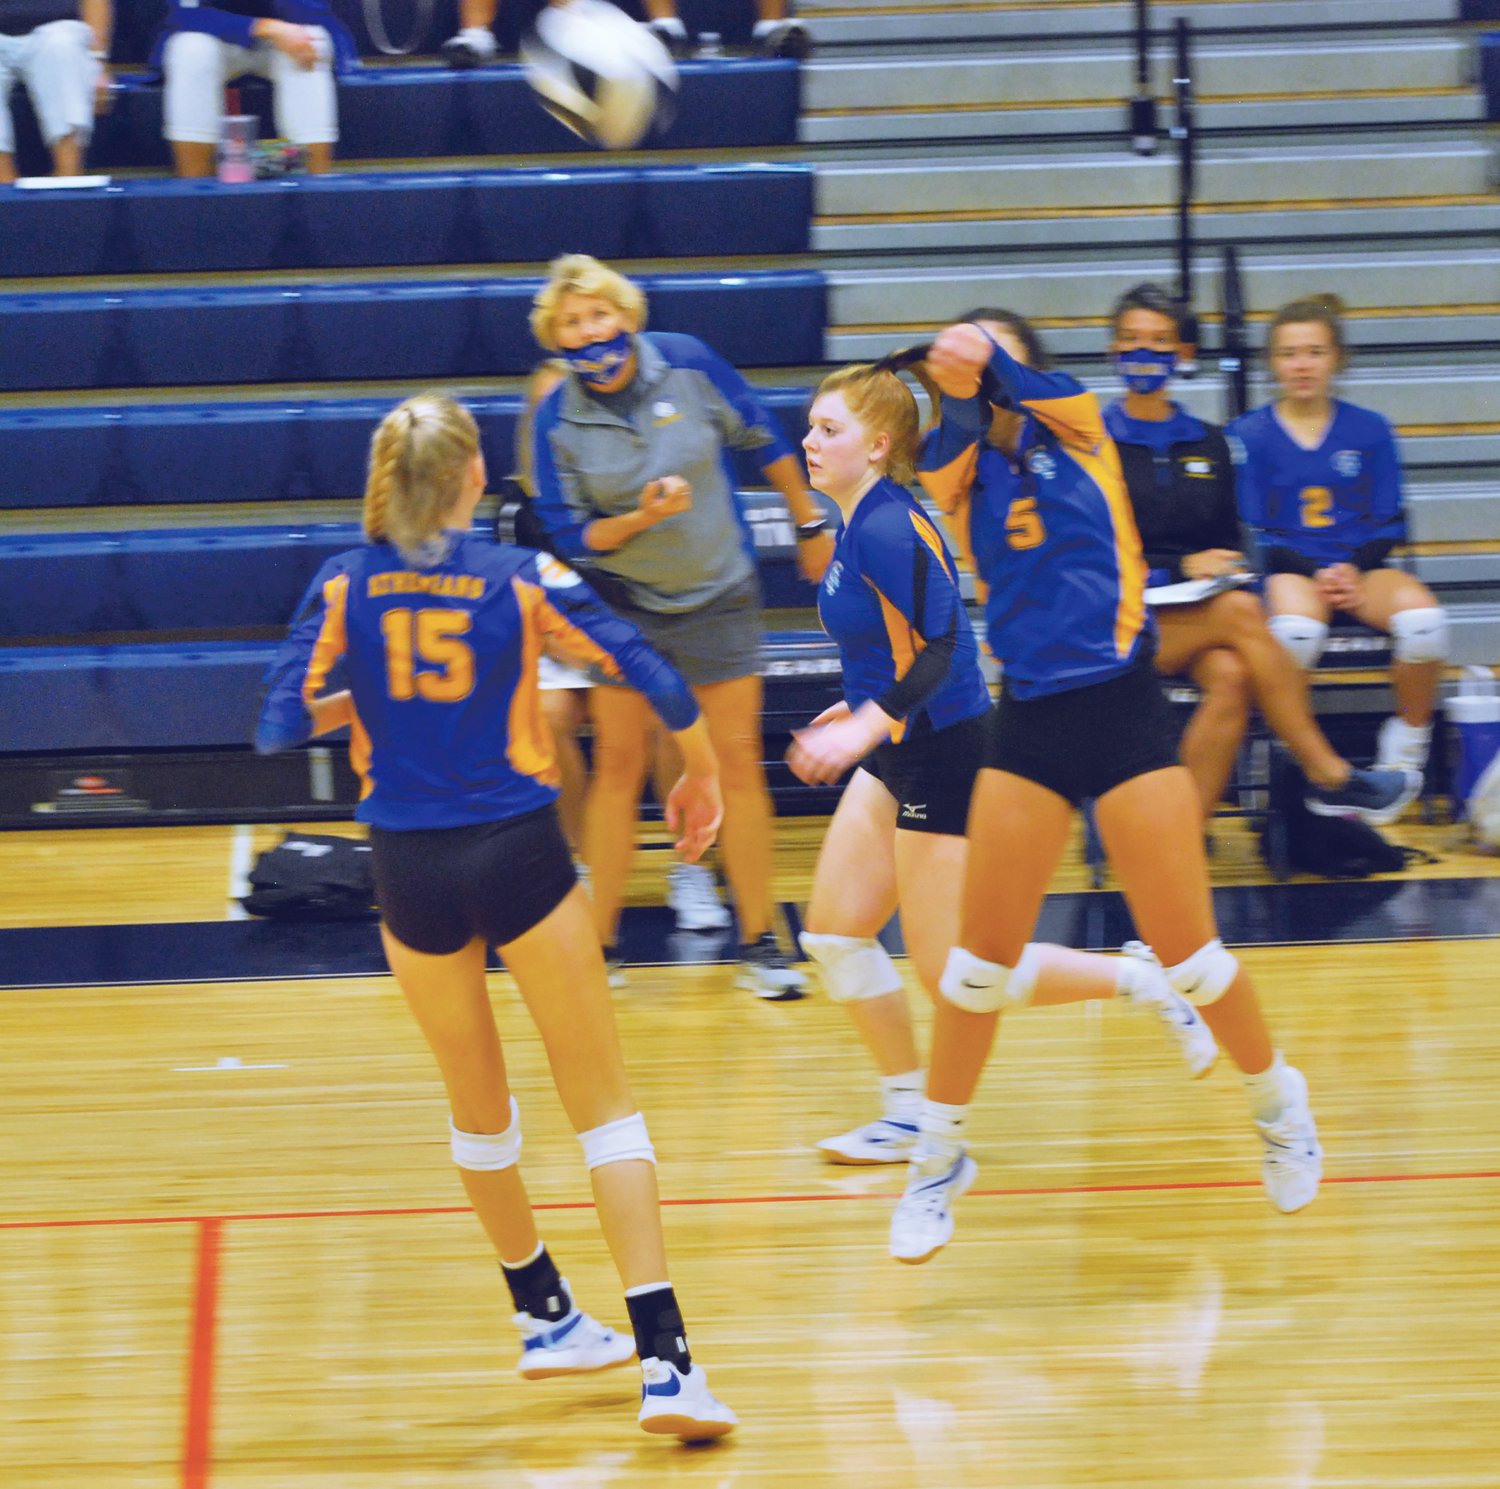 Crawfordsville's Shea Williamson returns a shot against North Putnam on Tuesday. The junior had 26 digs and 15 assists in the Athenians' 3-1 win over North Putnam.